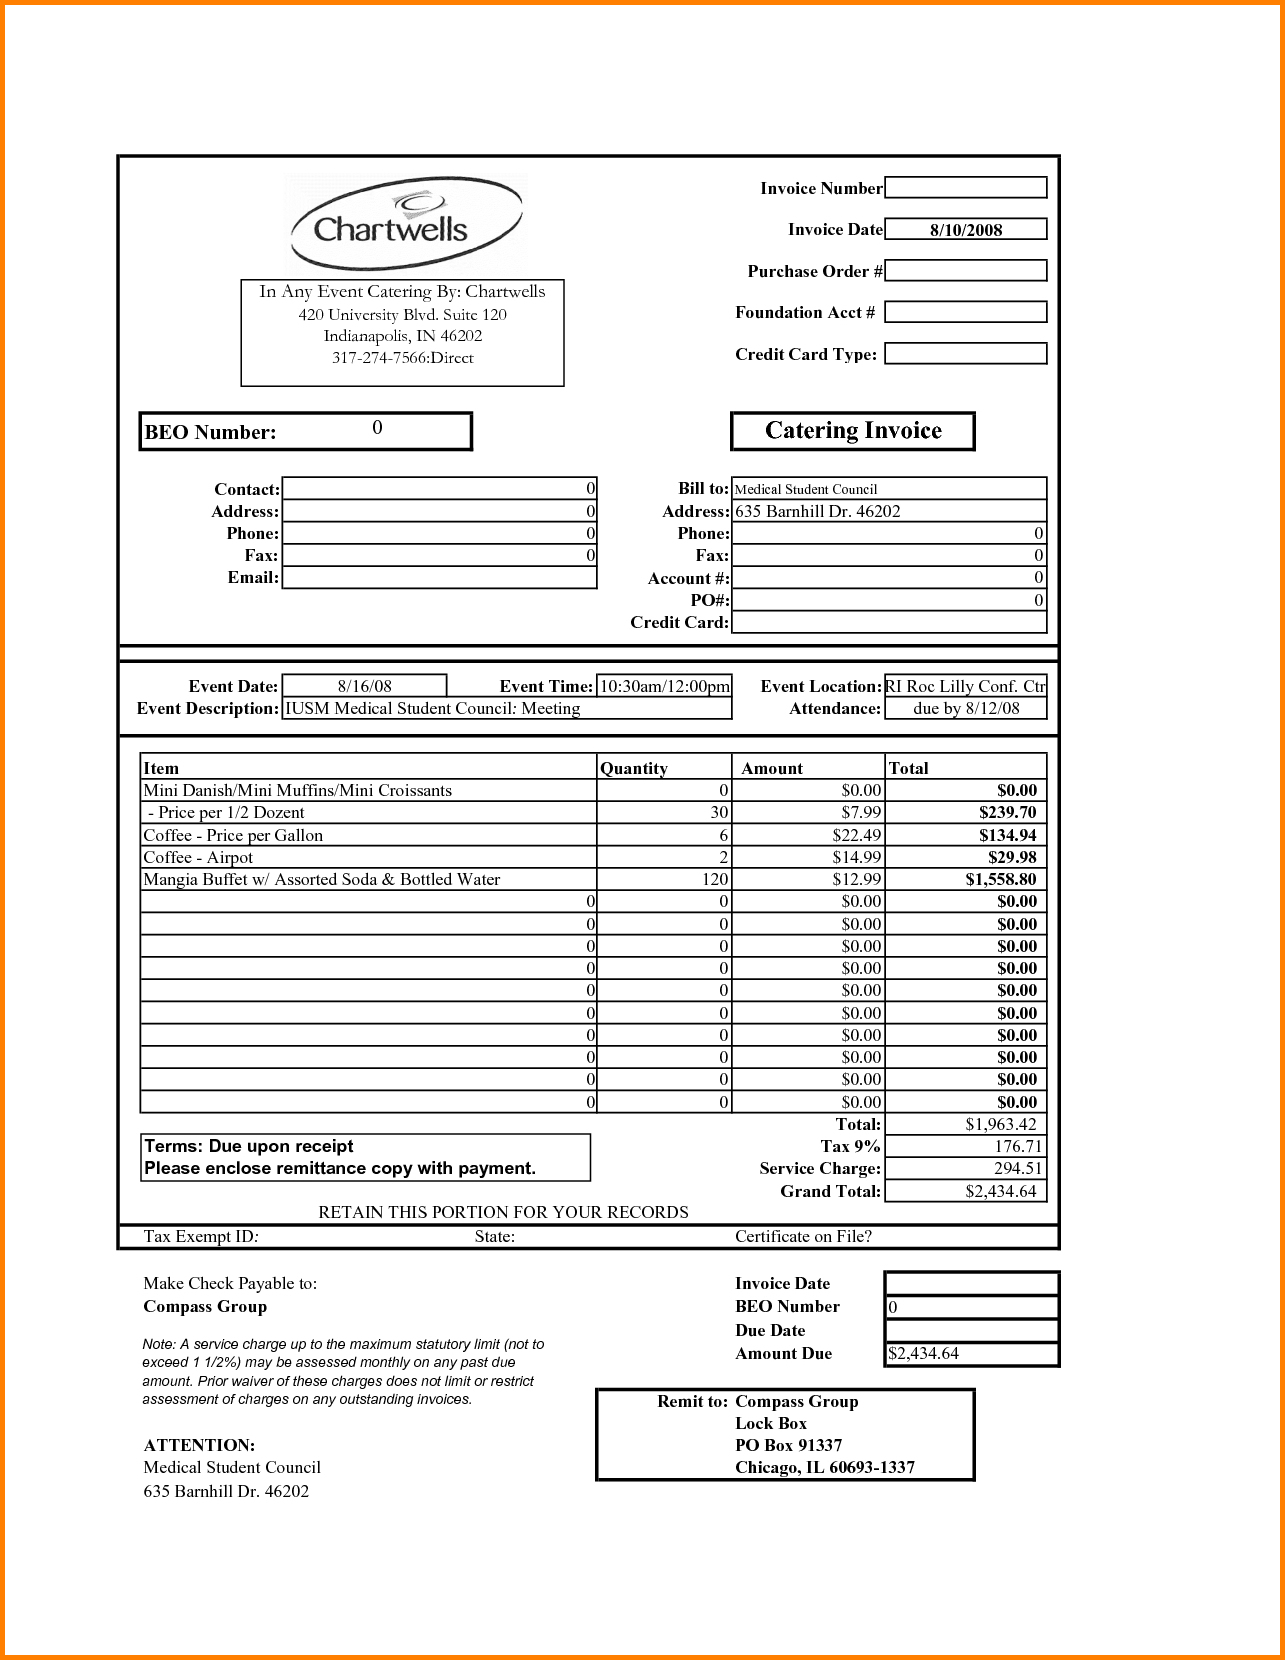 Download Catering Invoice Template Catering Invoice Template - Free Printable Catering Invoice Template